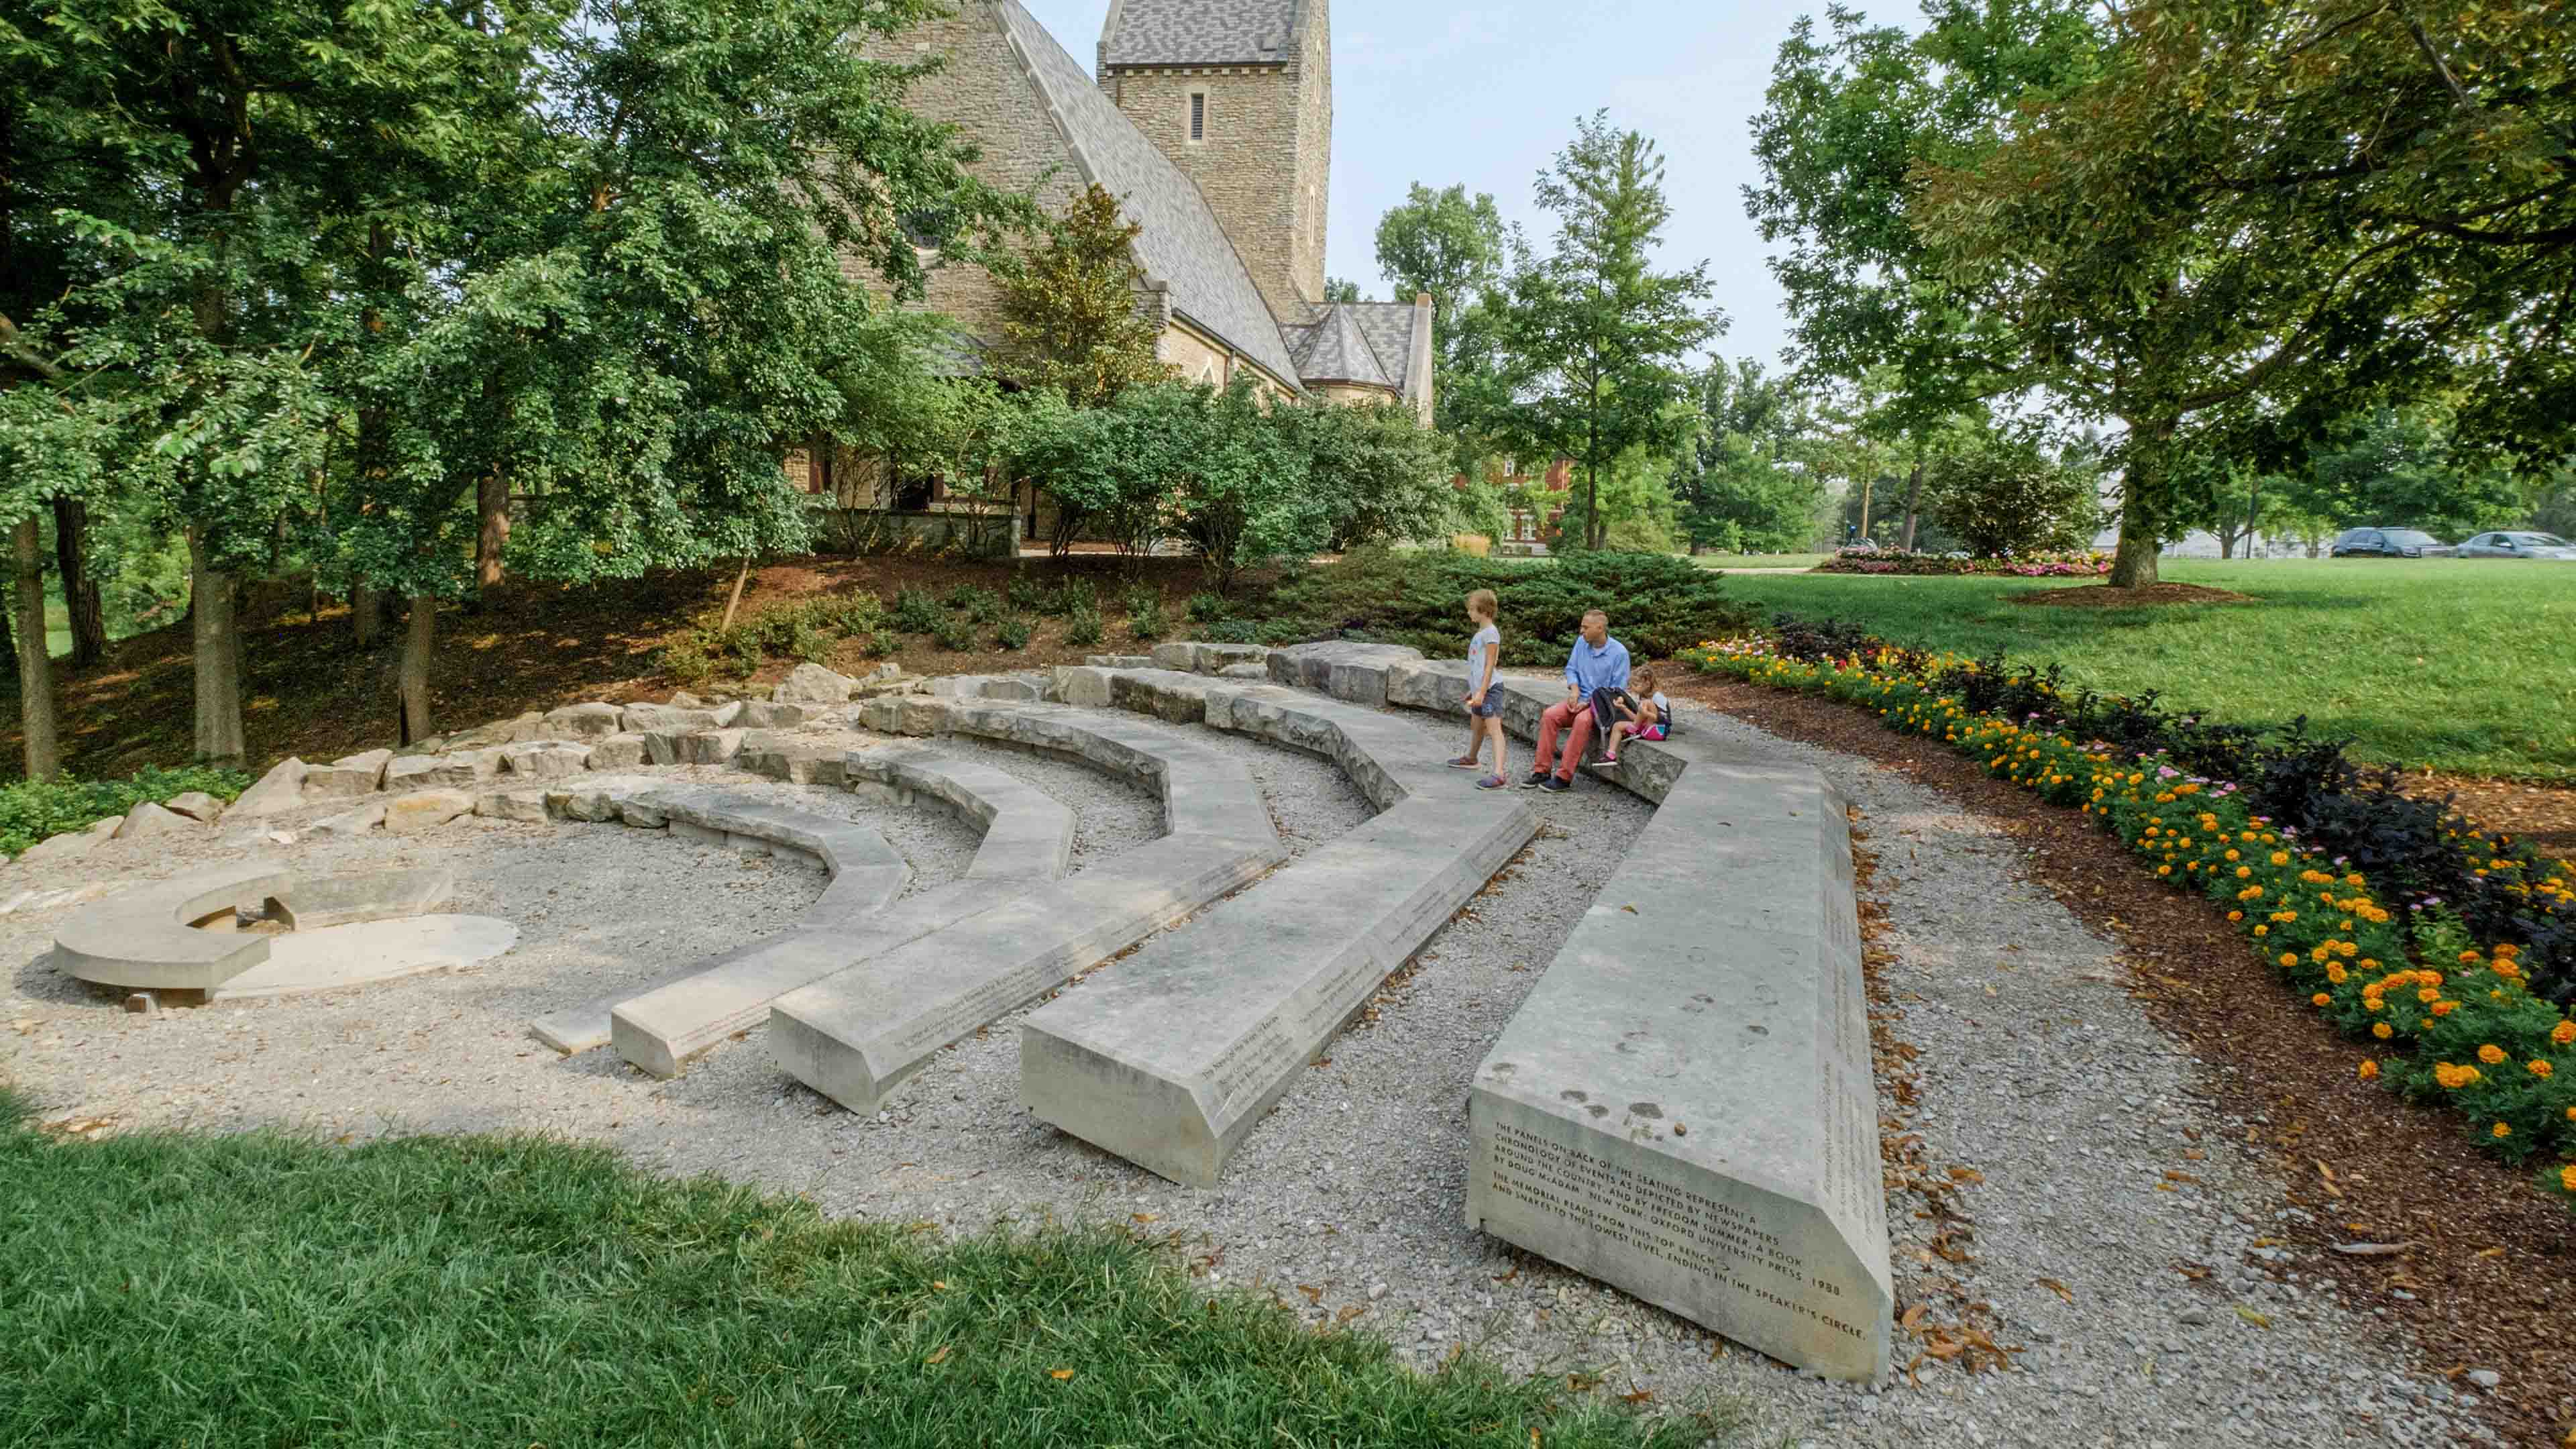 A man and a young girl sit on a stone bench, which is part of the Freedom Summer Memorial on Western Campus of Miami University. A second young girl stands on an adjacent stone bench, and all three people look toward the center of the memorial.